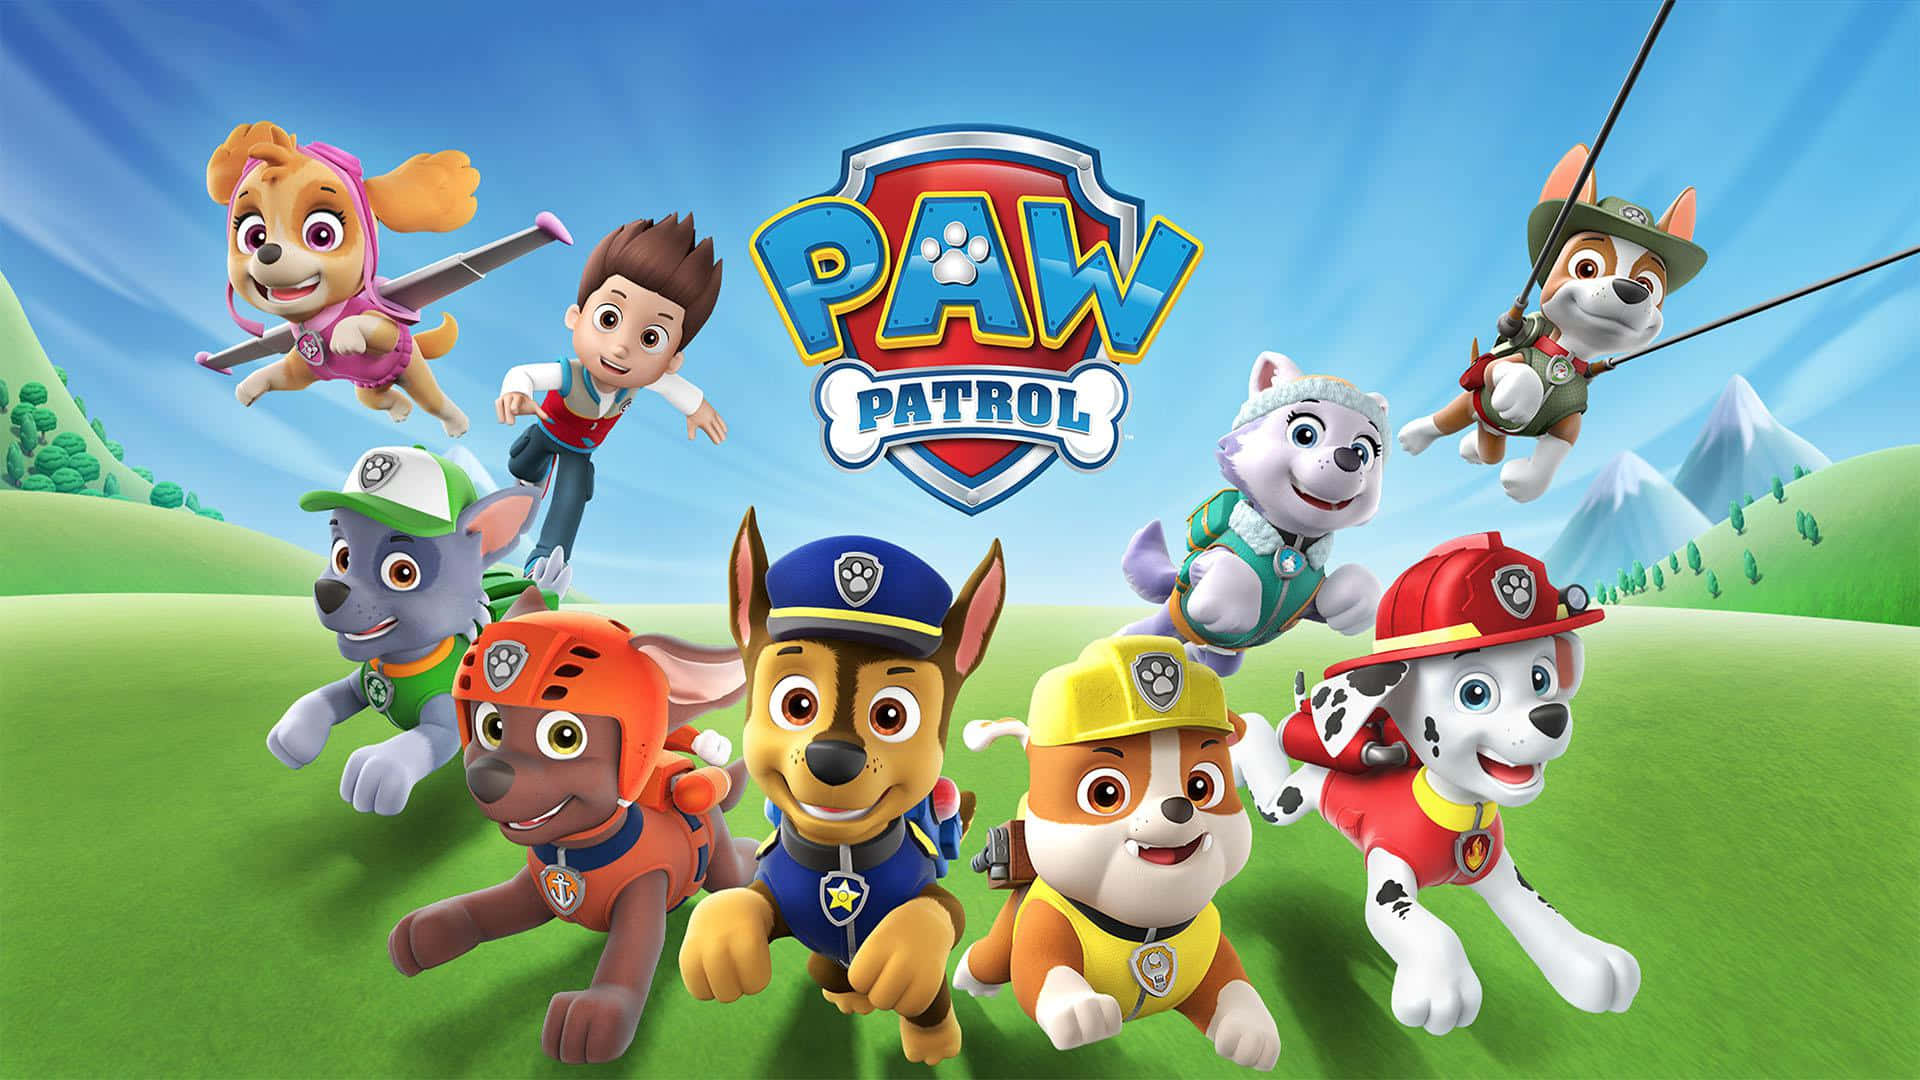 Join the Paw Patrol on an adventure!